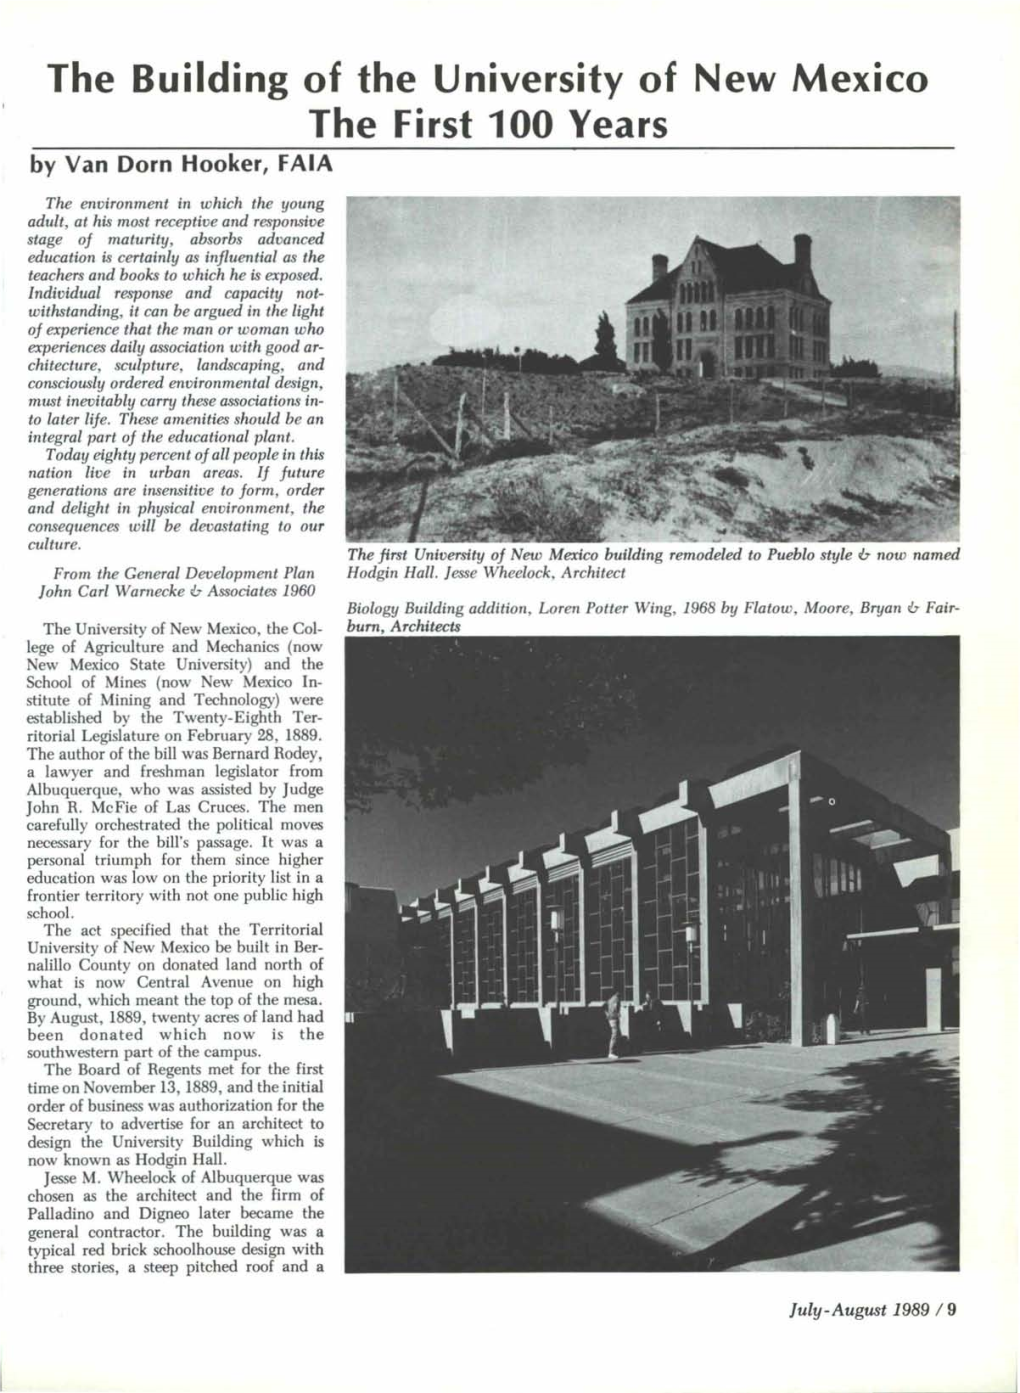 The Building of the University of New Mexico the First 100 Years by Van Dorn Hooker, FAIA